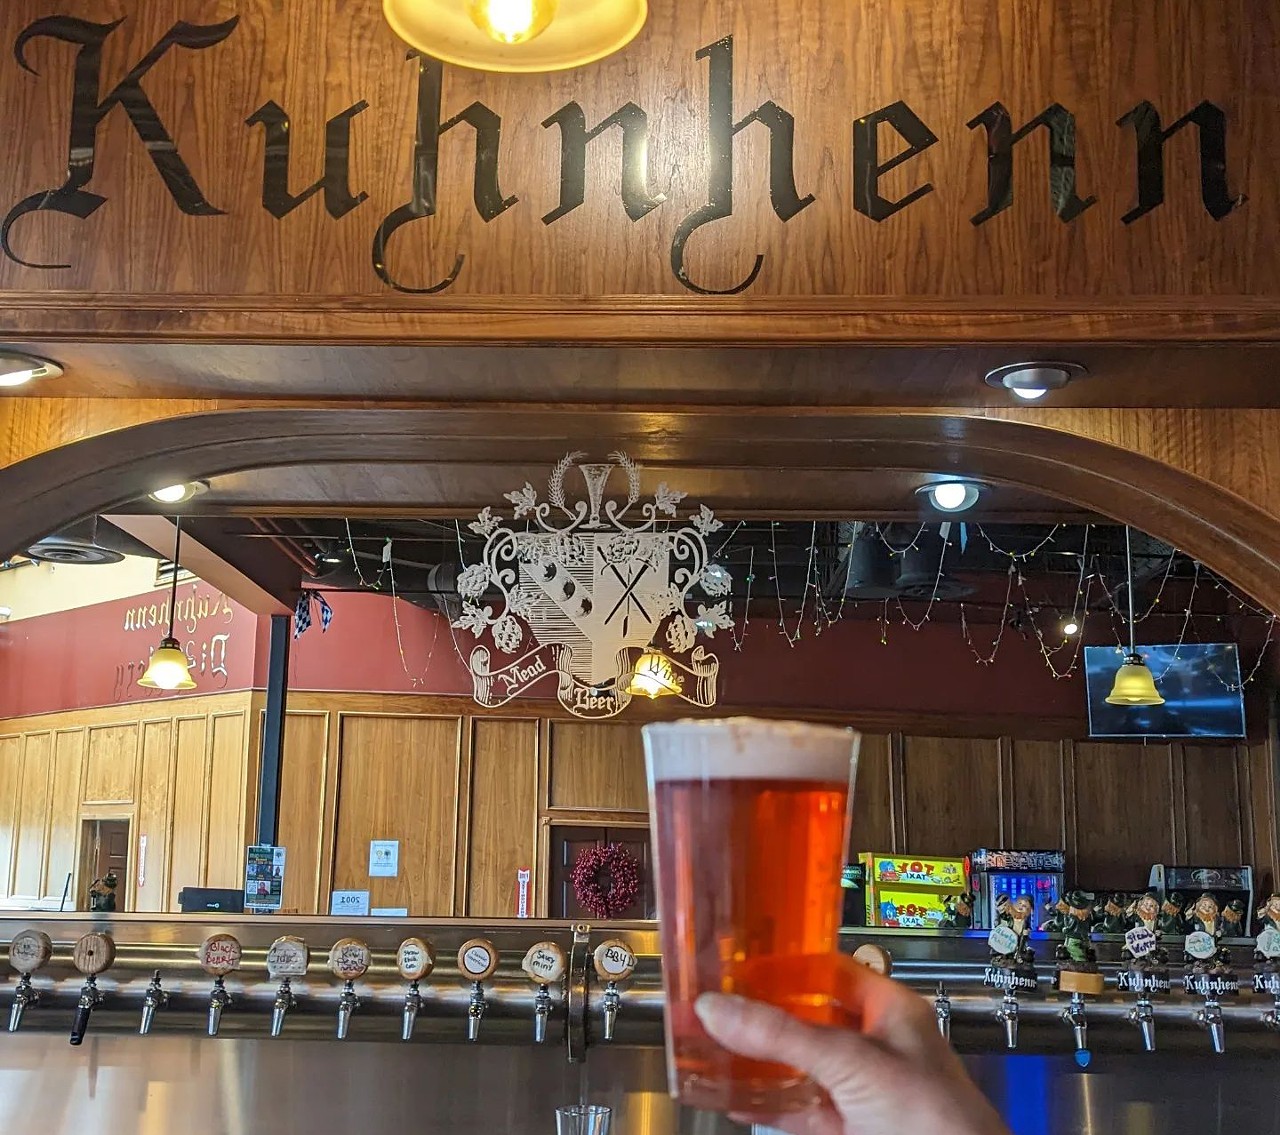 Kuhnhenn Brewing Co.
36000 Groesbeck Hwy., Clinton Twp.; 586-231-0249 | 5919 Chicago Rd., Warren; 586-983-8362 | kbrewery.com
With the long list of craft beers, this brewery also offers a plethora of entrees and appetizers to enjoy alongside a signature drink. 